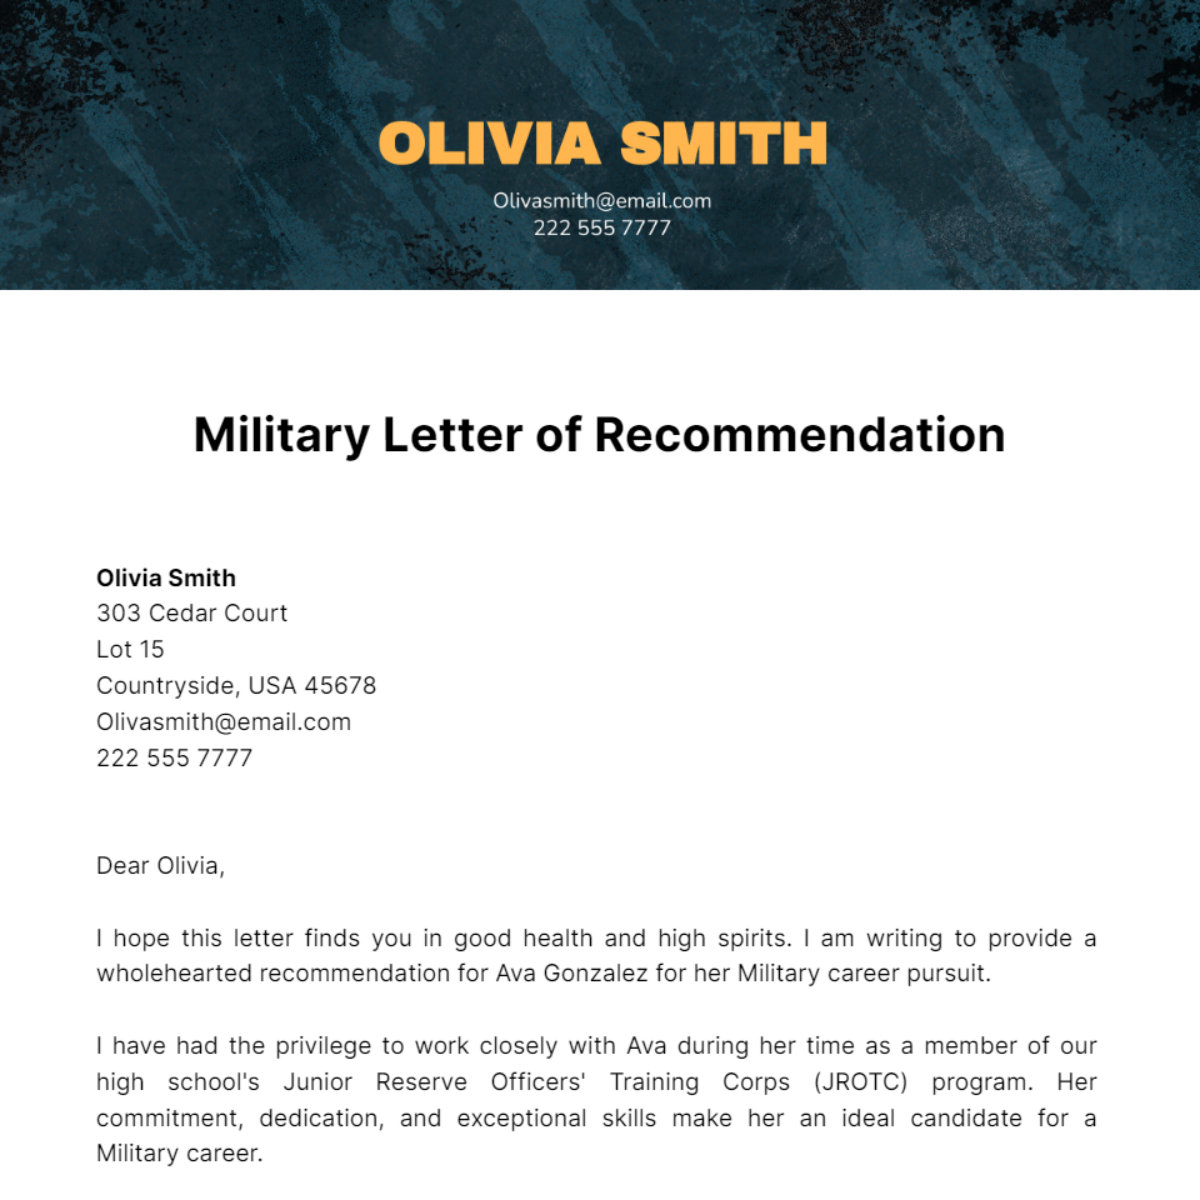 Military Letter of Recommendation Template